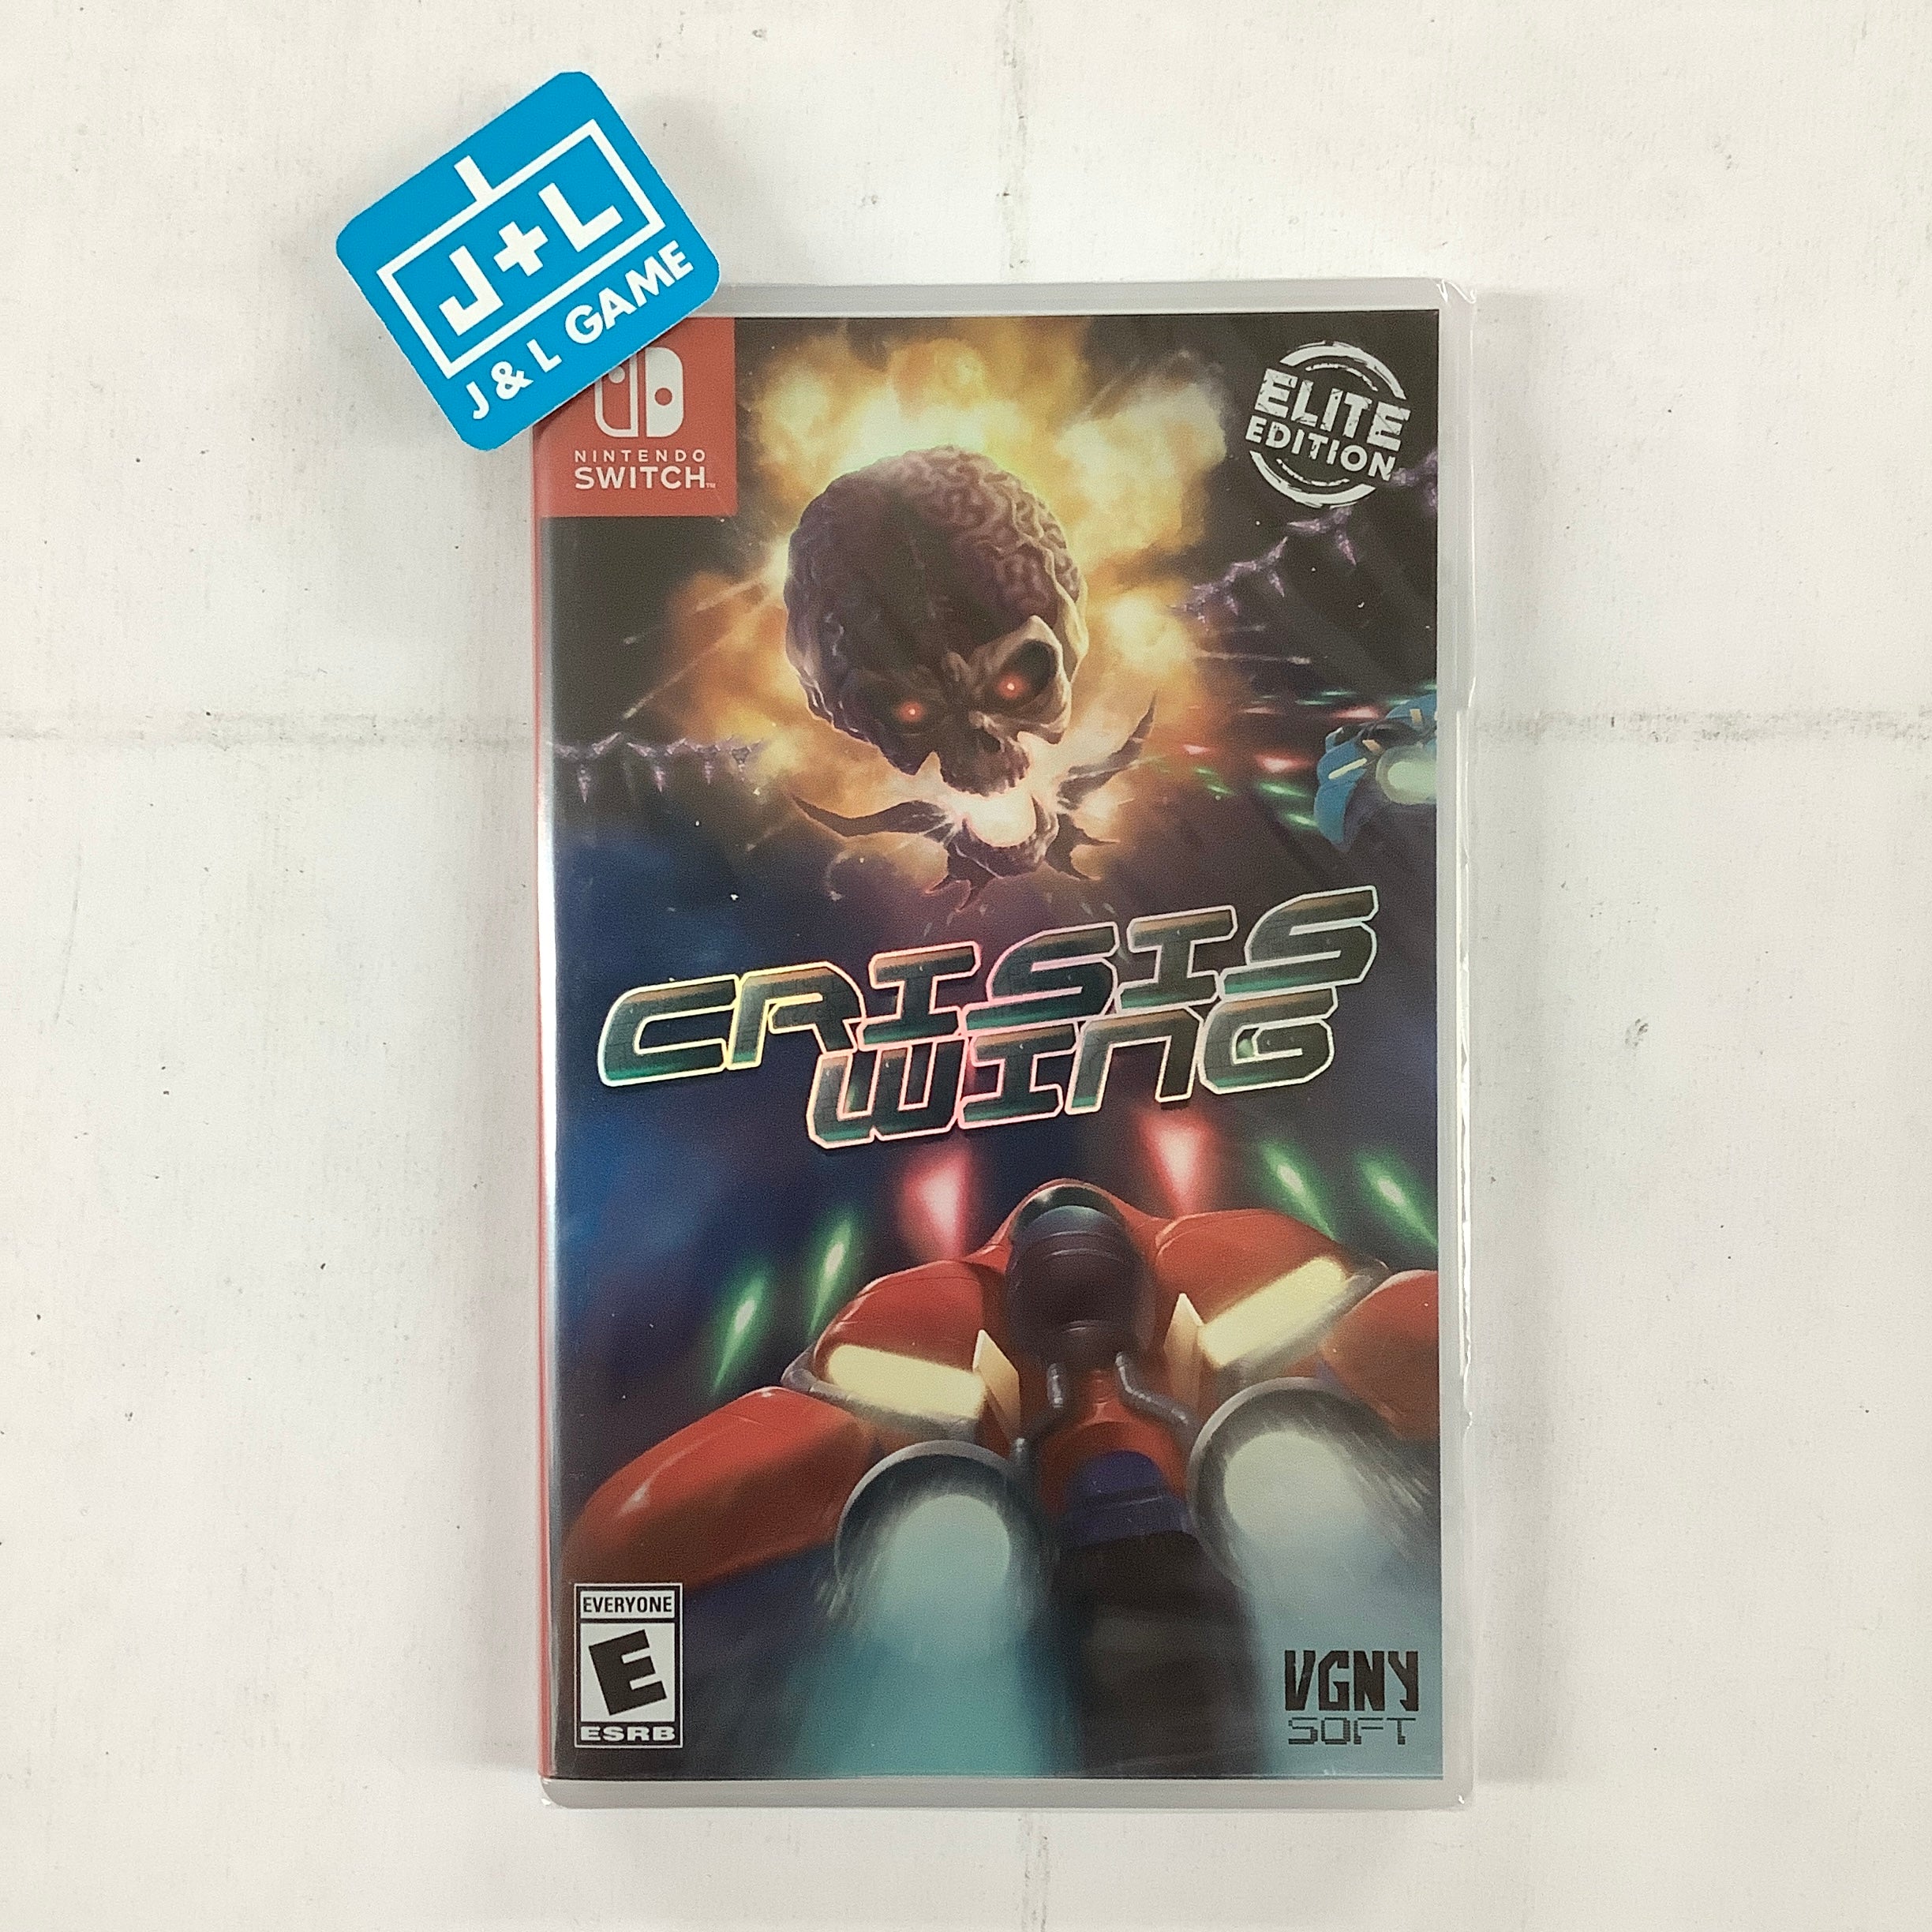 Crisis Wing (Elite Edition) - (NSW) Nintendo Switch Video Games VGNYsoft   